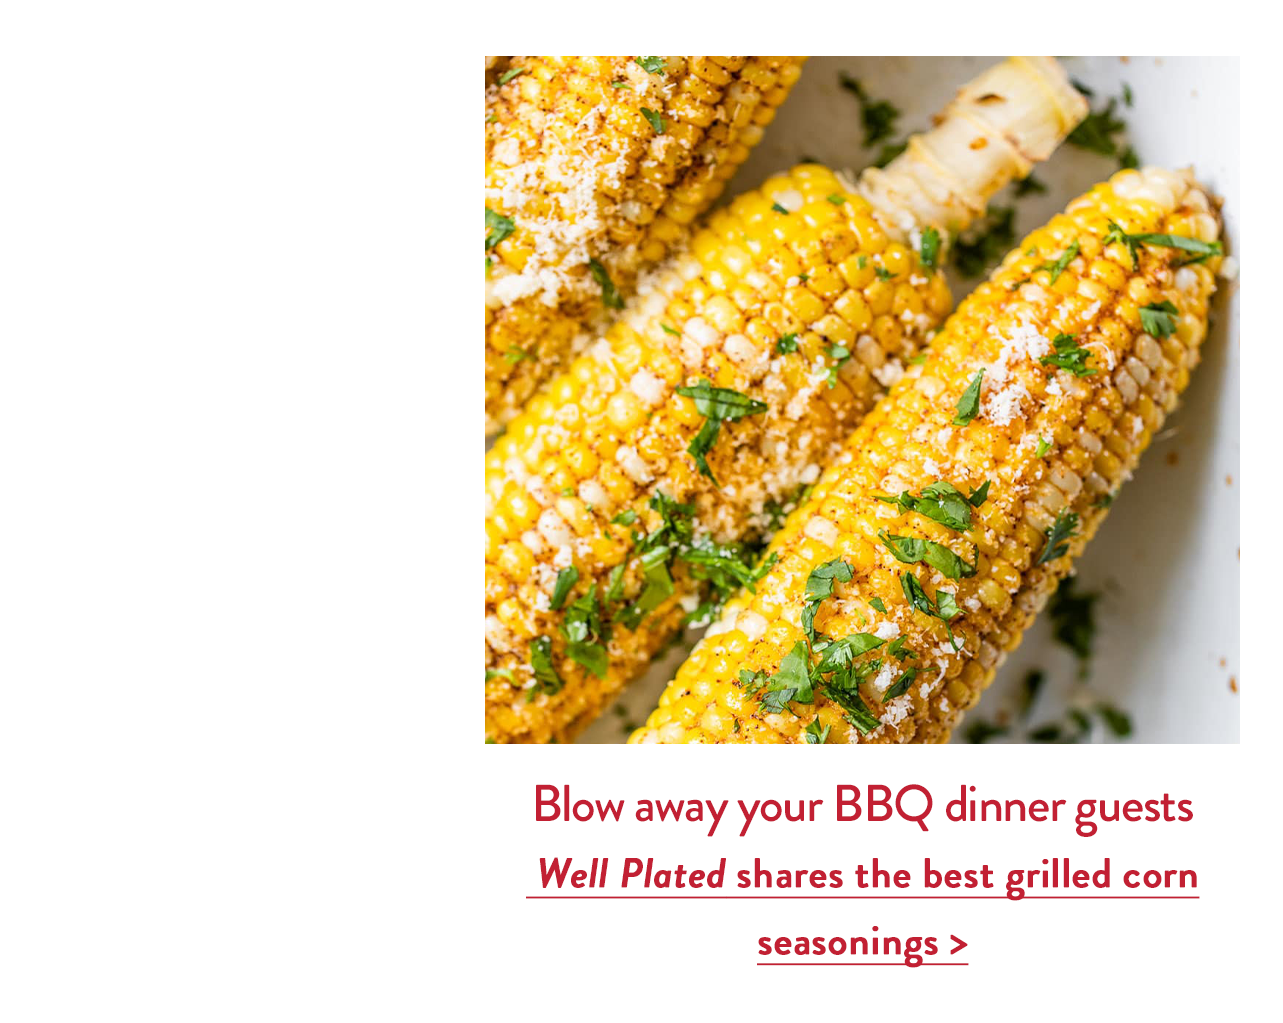 Blow away your BBQ dinner guests